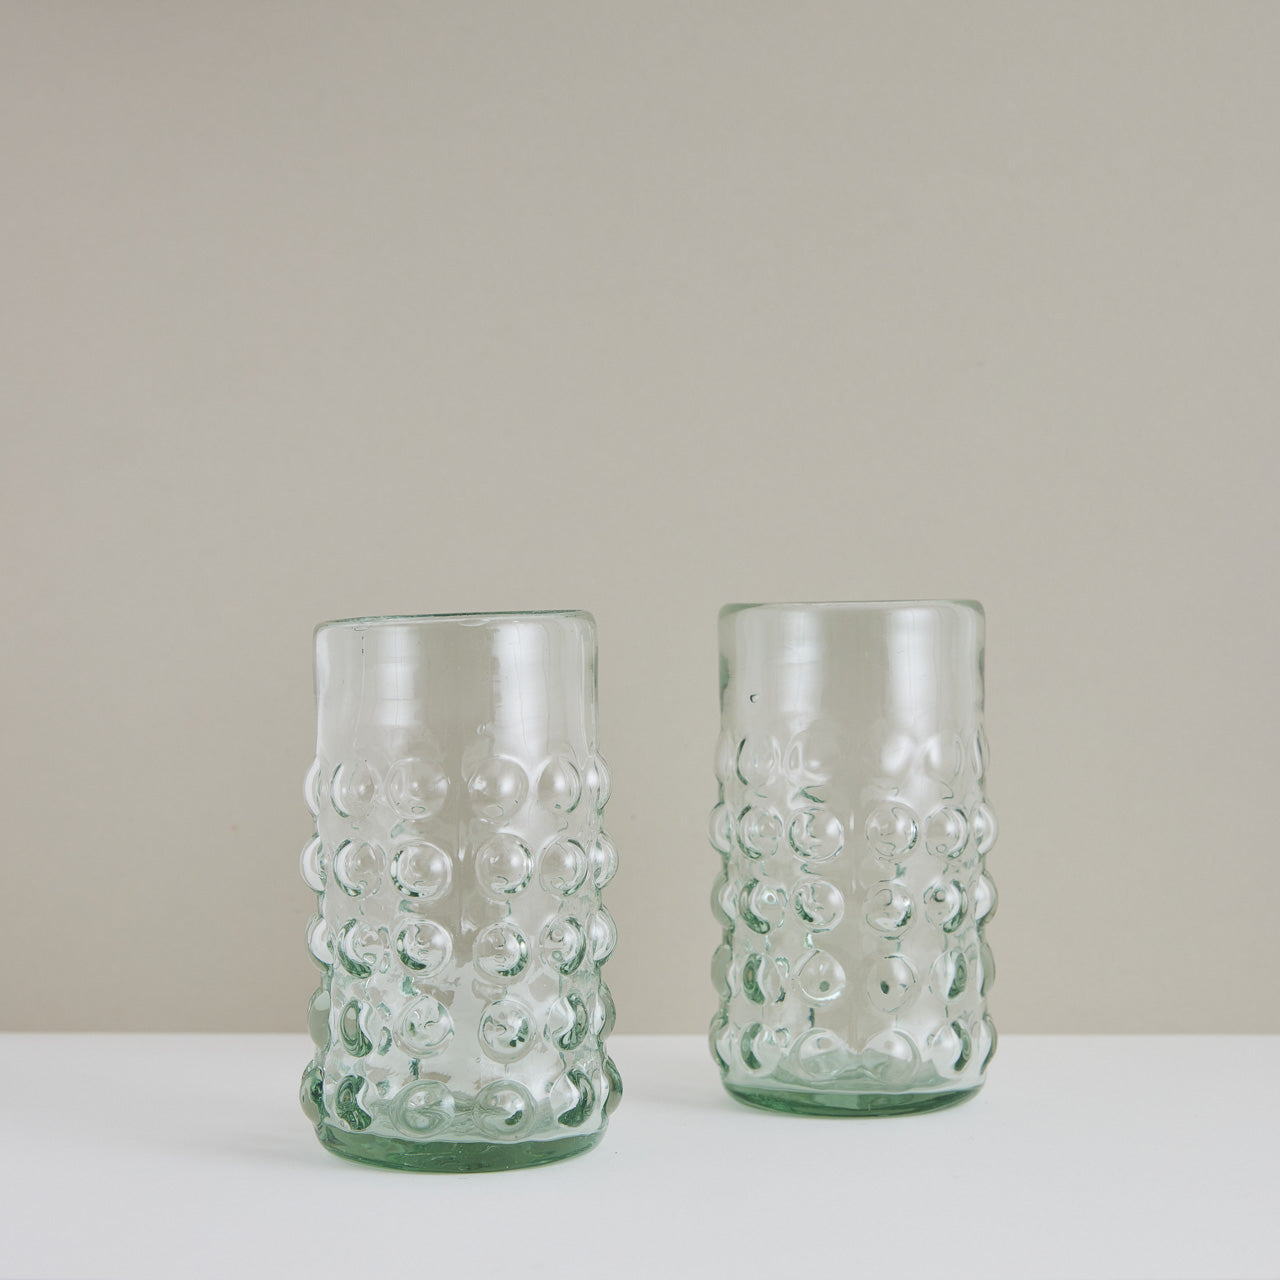 A pair of handblown hobnail glass tumblers made in Mexico.